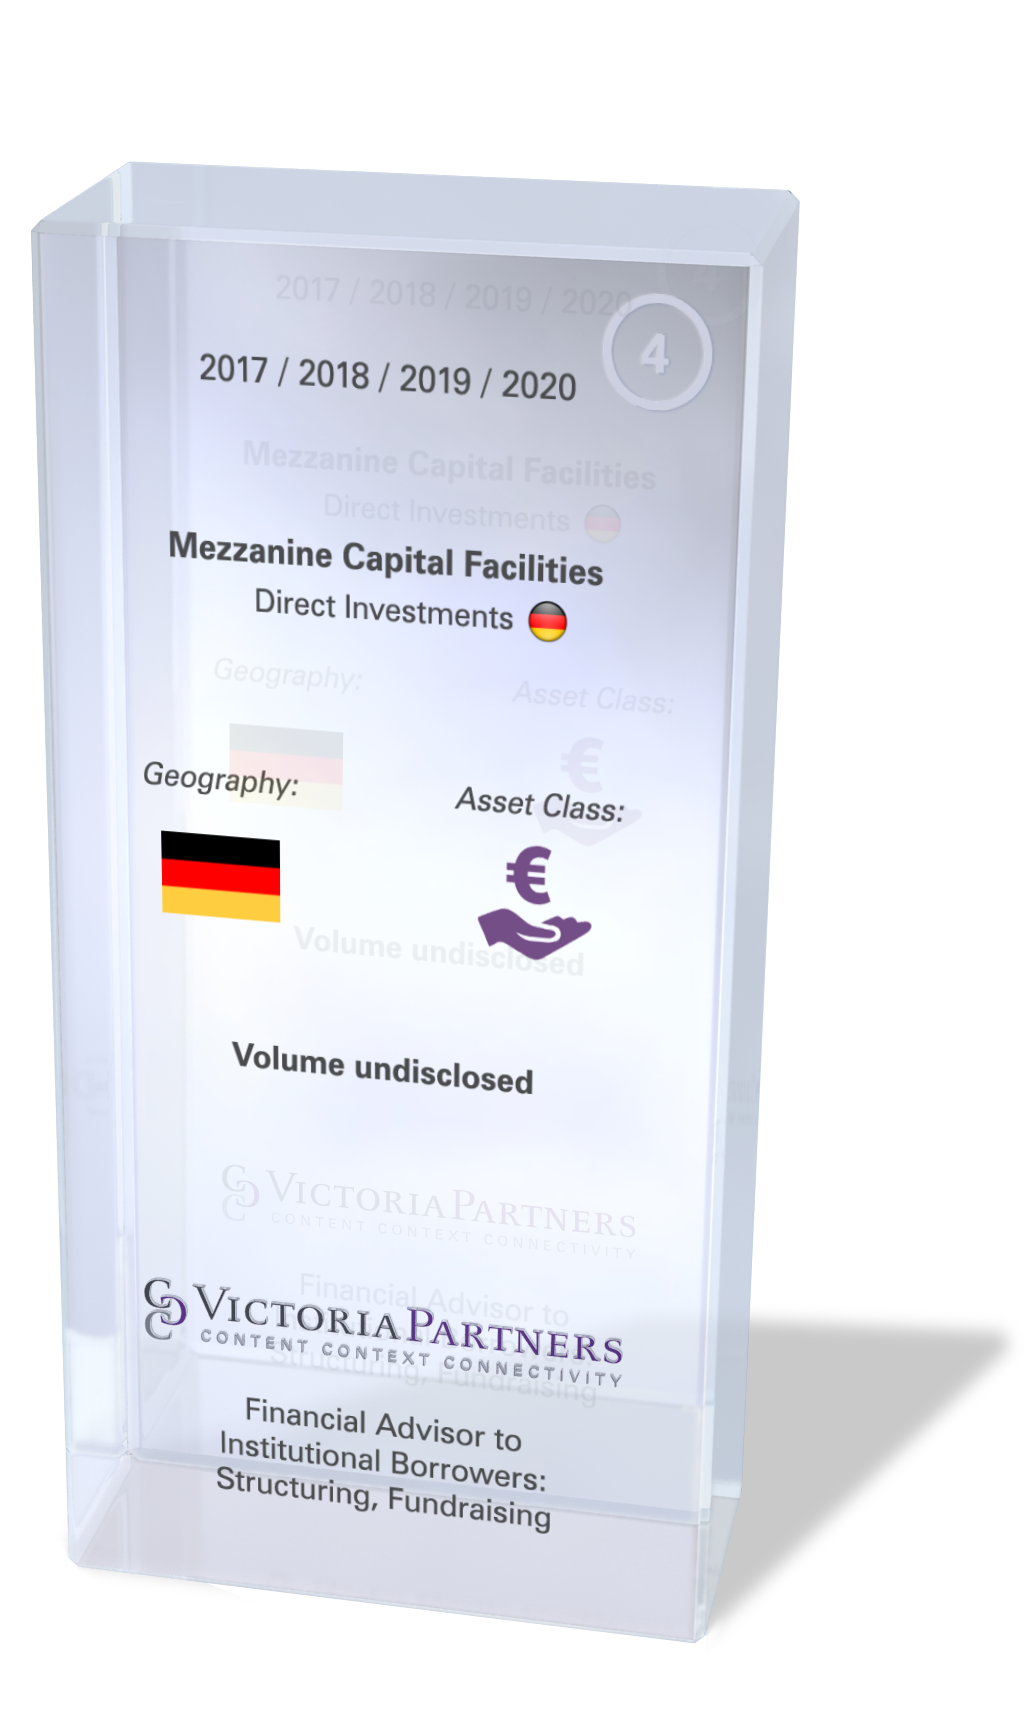 VICTORIAPARTNERS - Financial Advisor to Institutional Borrowers: Structuring, Fundraising in Deutschland- 2017/2018/2019/2020